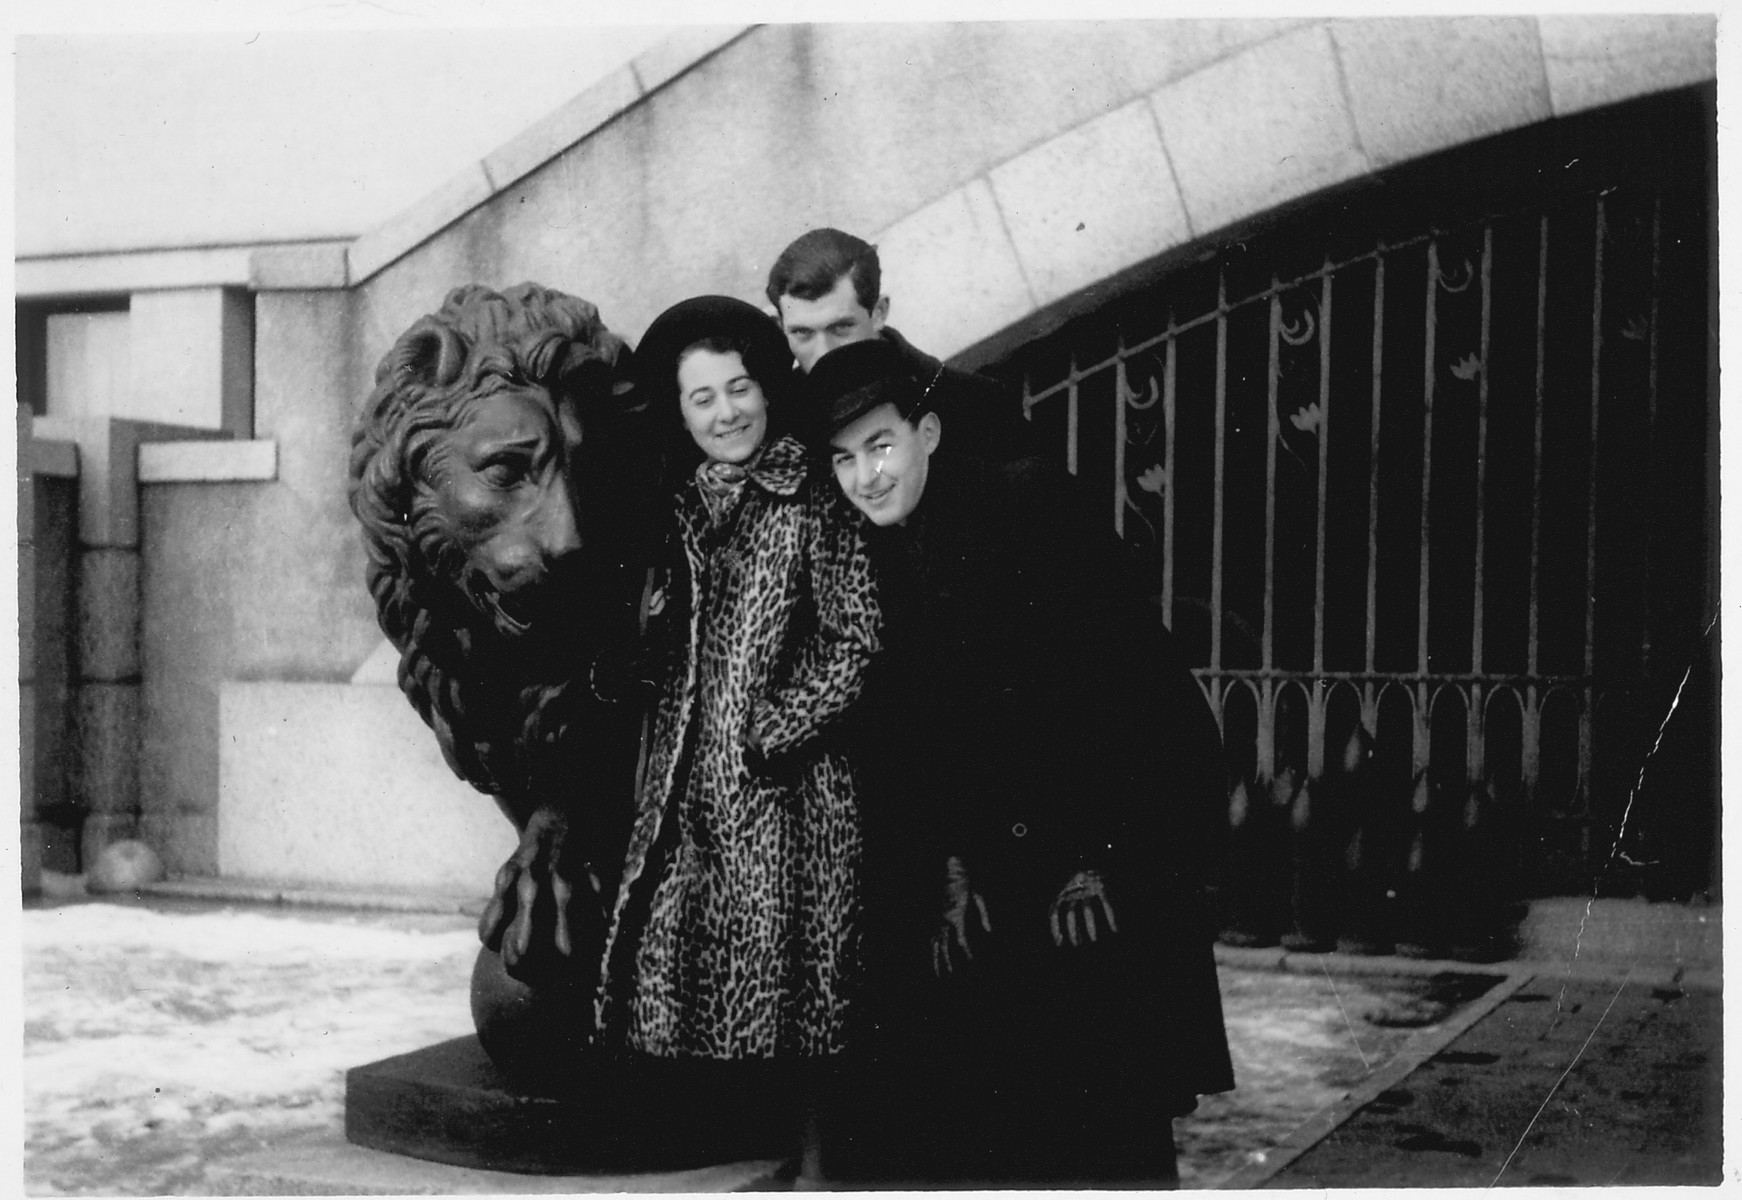 Hanni Sondheimer, Liusa Joffe and Herman Berlovic stand by a statue of a lion in Kaunas at the War Museum.